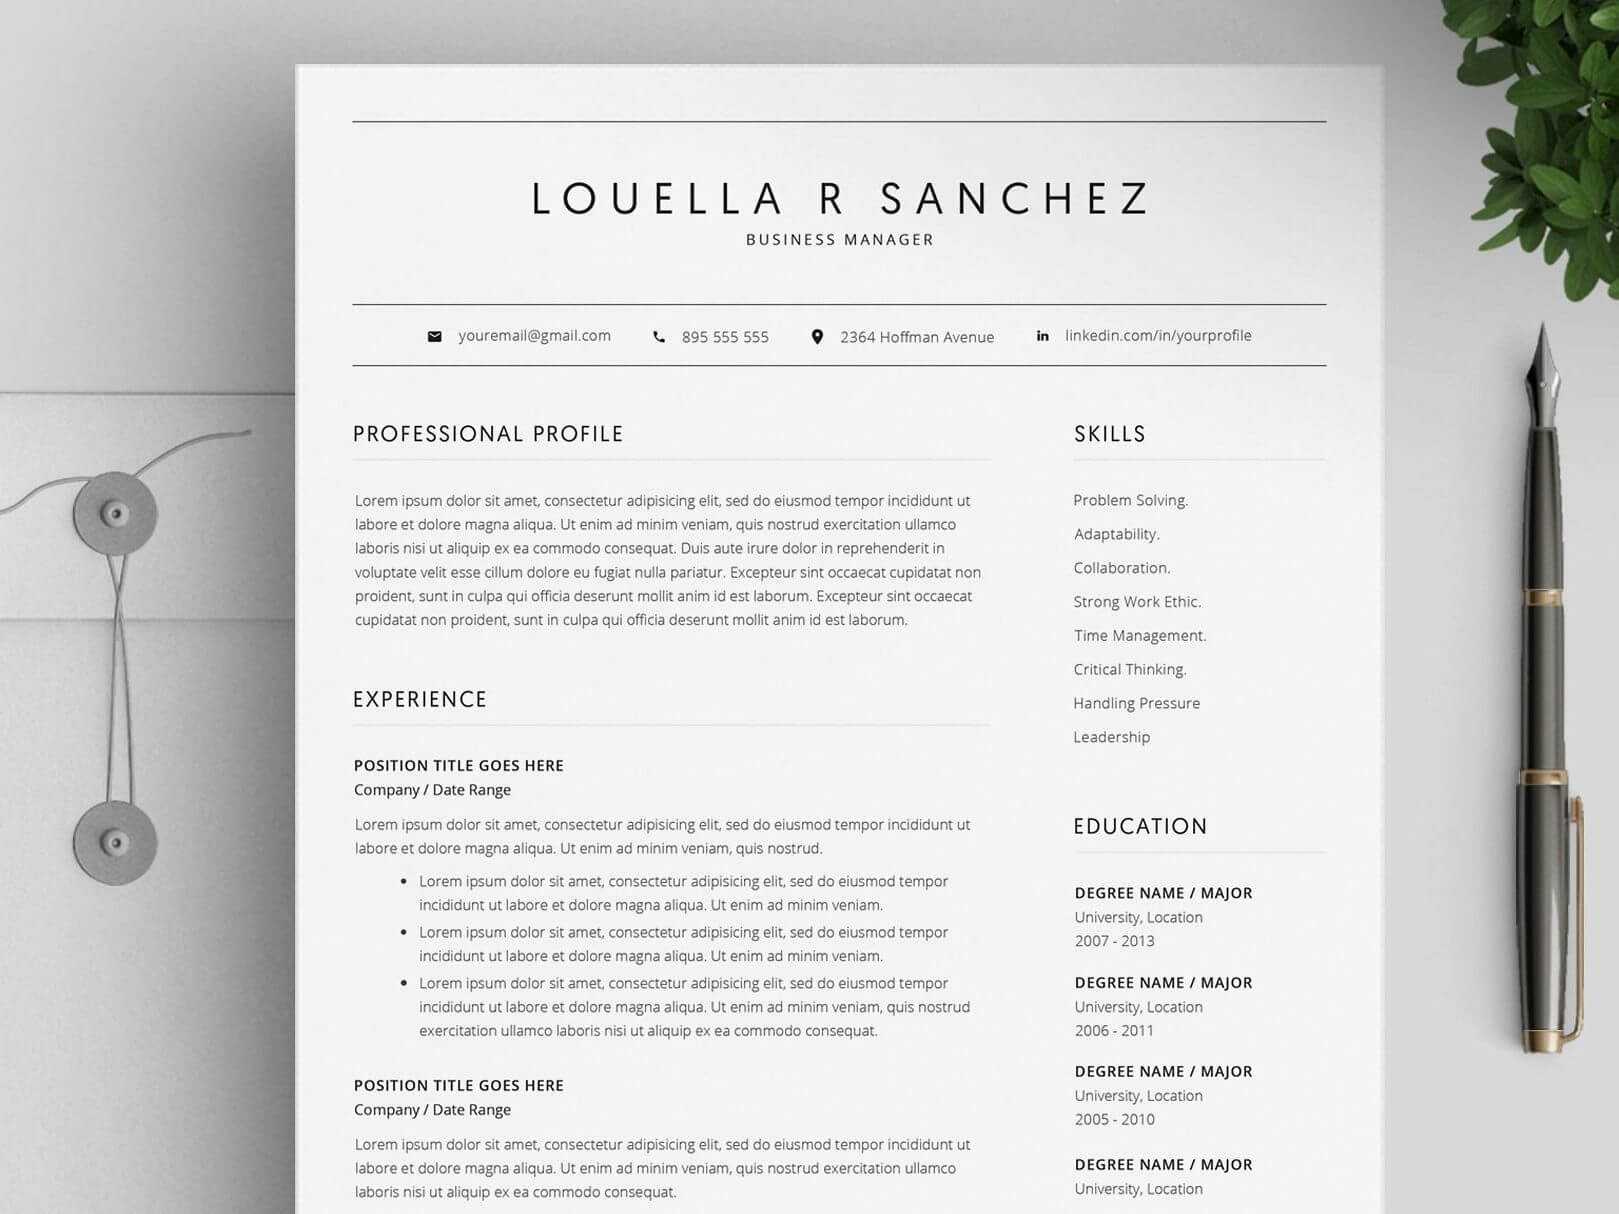 Resume Template Word & Mac Pages Cv | Resume, Templates, Words With Regard To Scientific Paper Template Word 2010